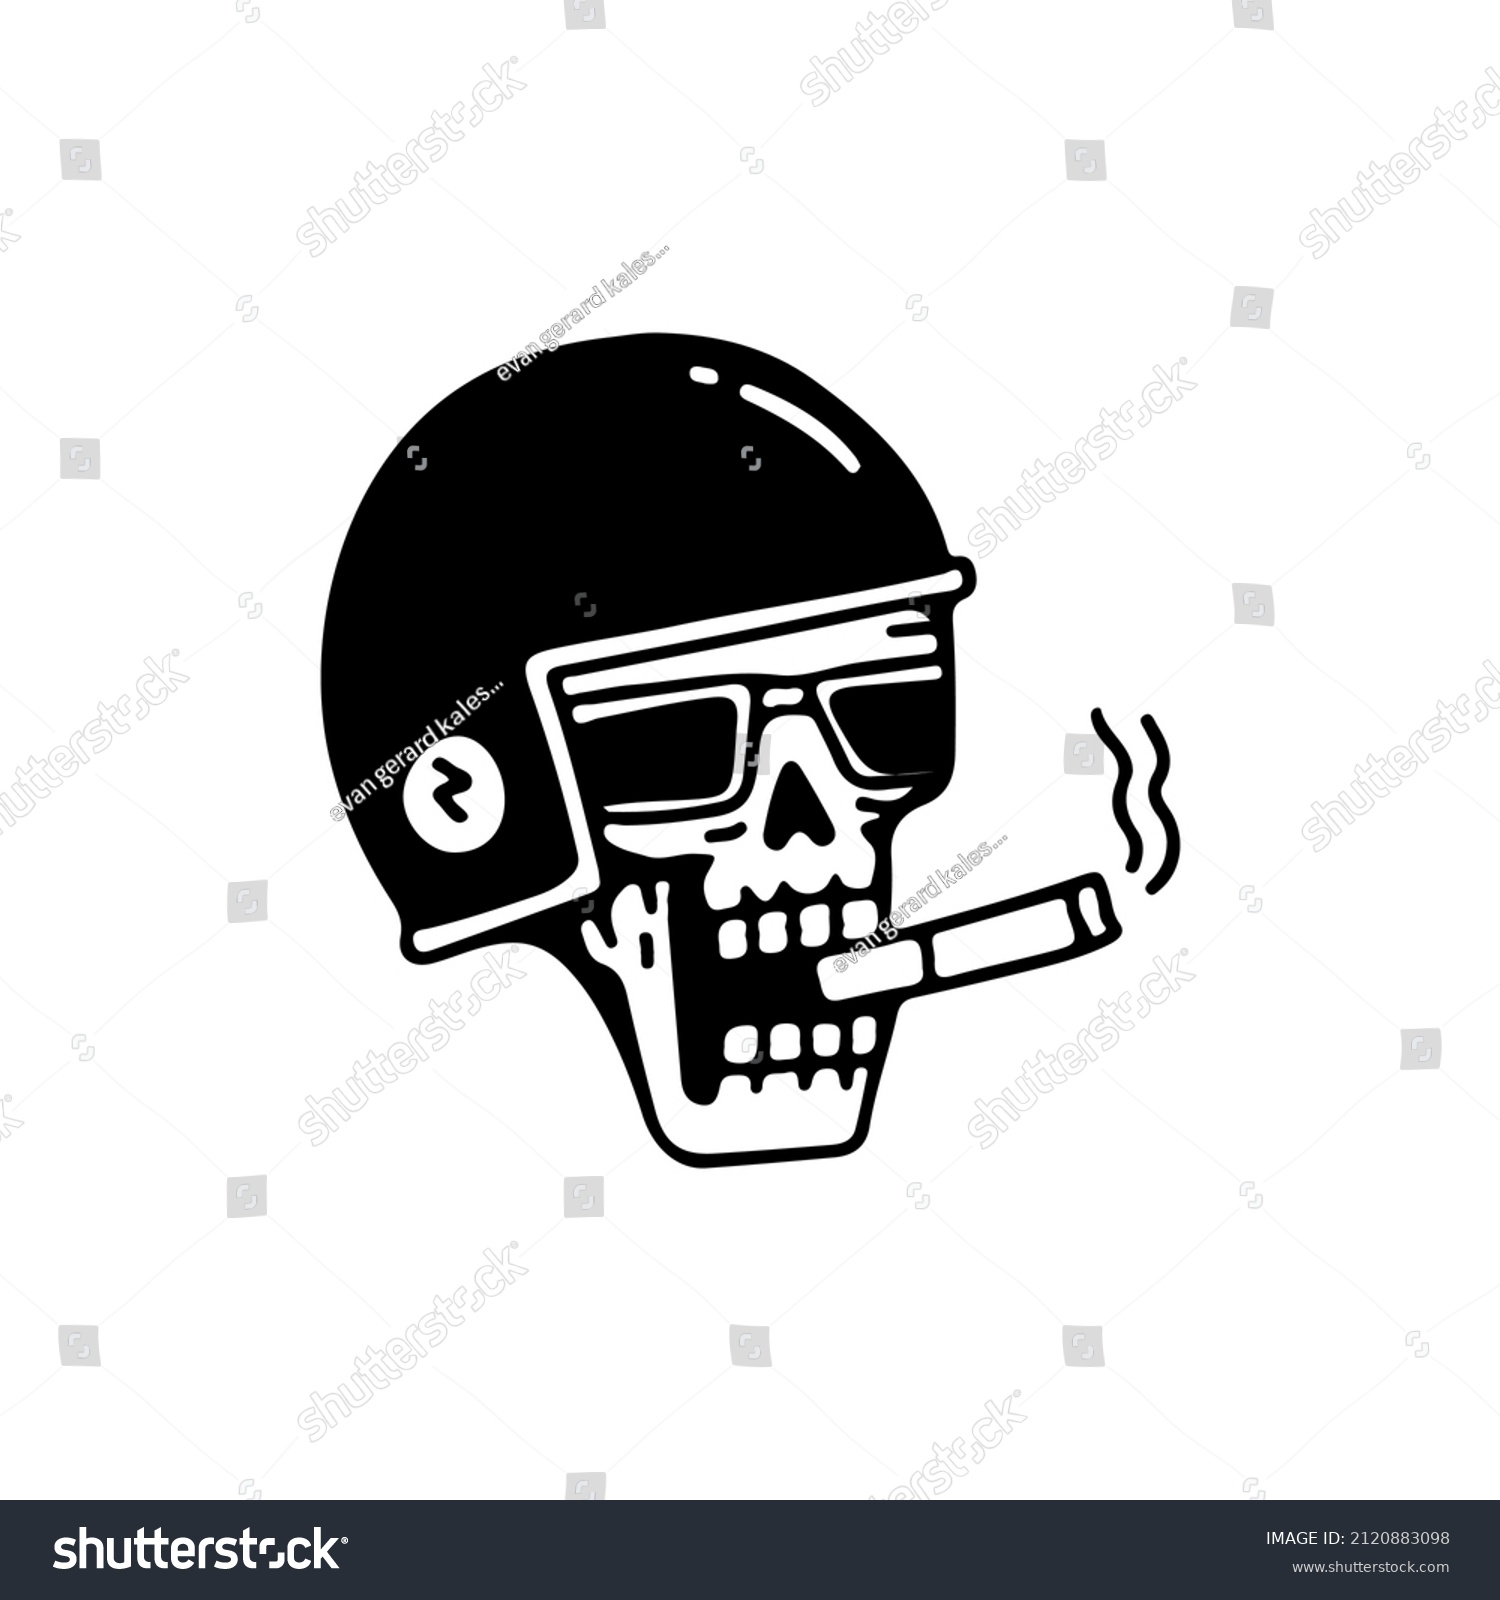 SVG of Cool skeleton wearing helmet and sunglasses, smoking cigarette, illustration for t-shirt, sticker, or apparel merchandise. With retro cartoon style. svg